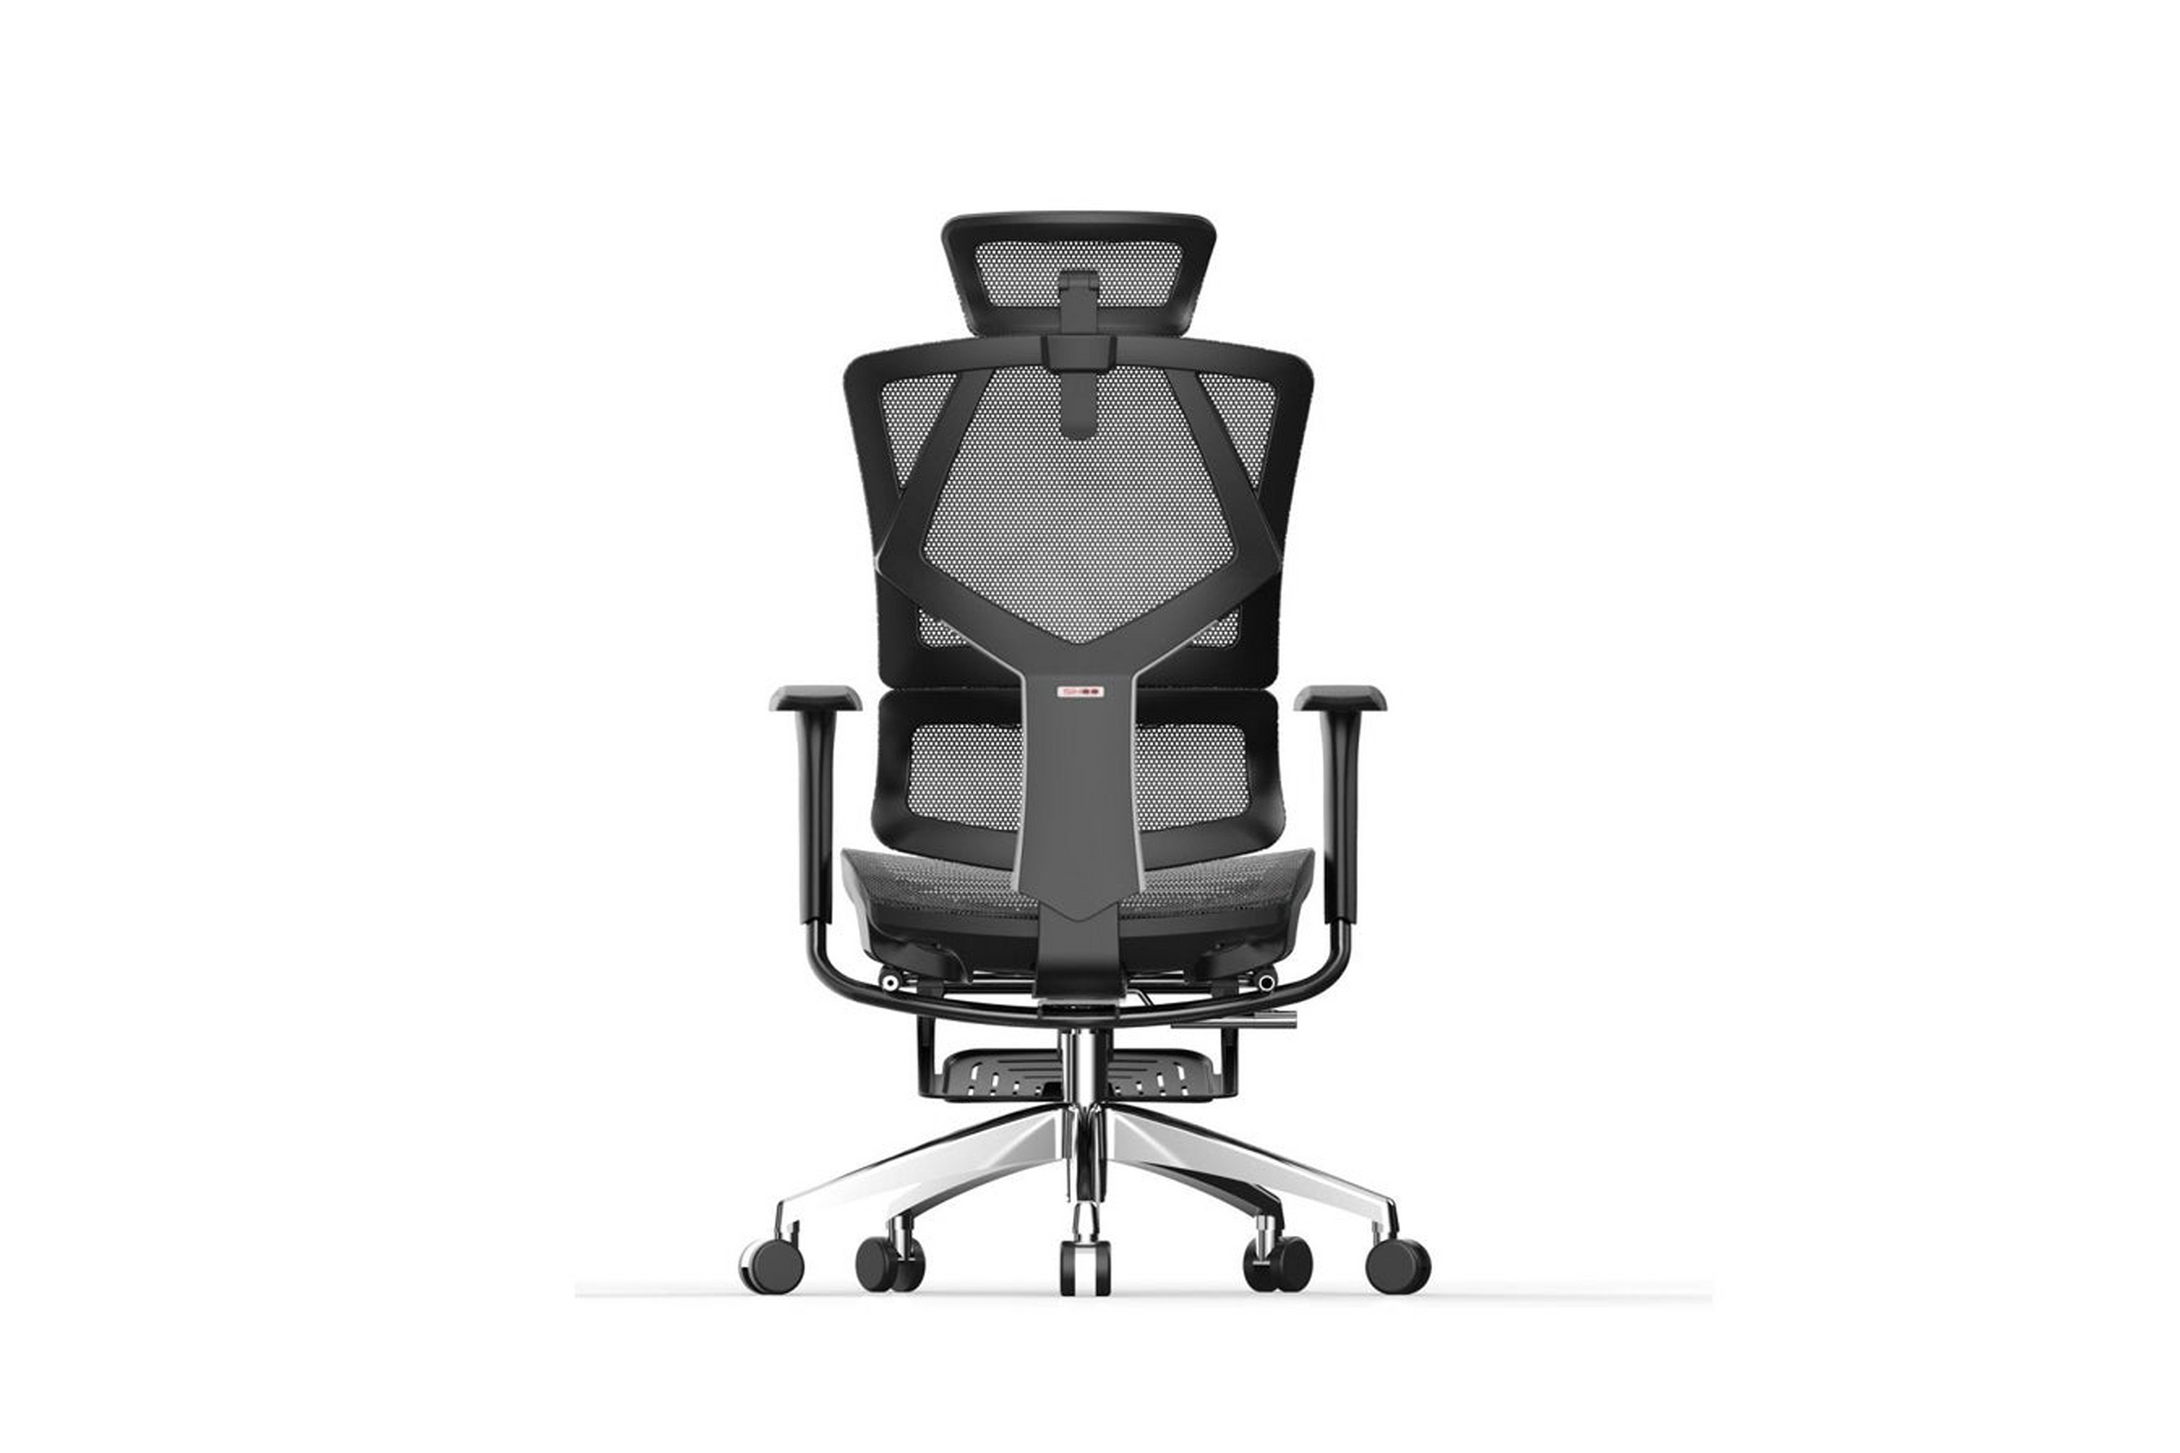 Sihoo VIto M90 Ergonomic Office Chair with Footrest